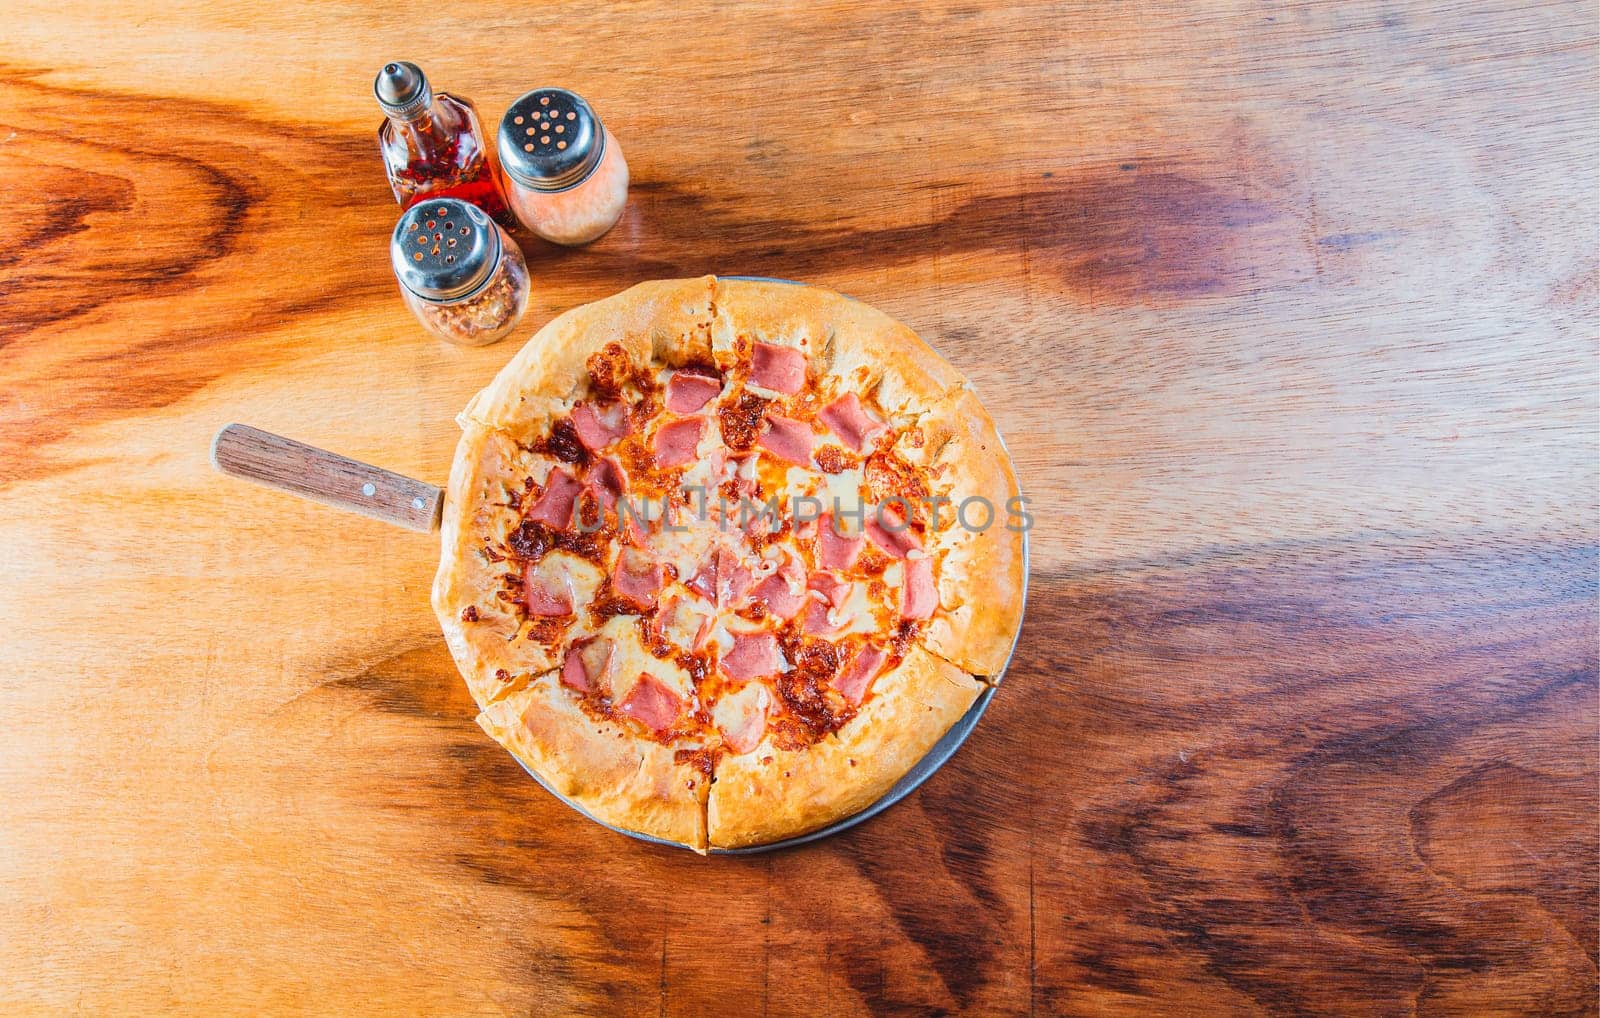 Ham pizza with cheese edge on wooden background. Top view of ham and cheese pizza on wooden table